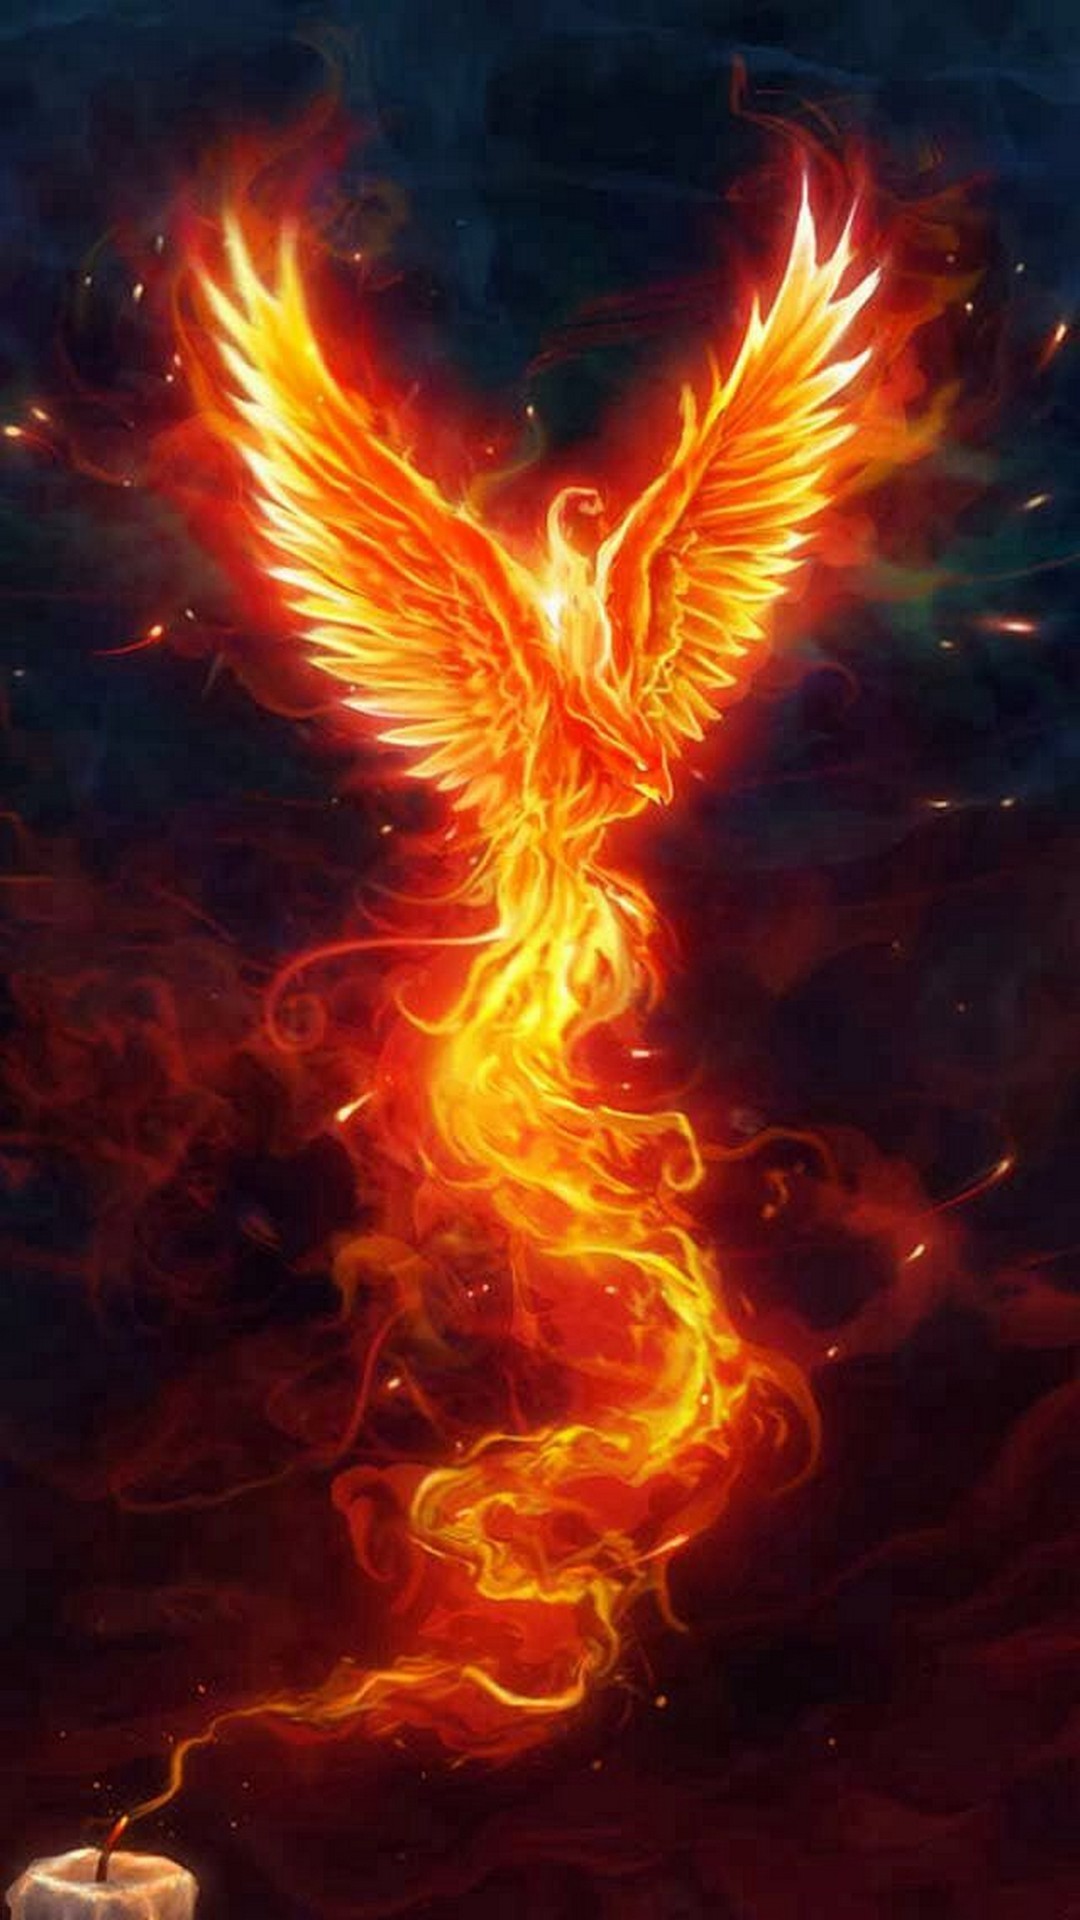 Wallpaper Android Phoenix with image resolution 1080x1920 pixel. You can make this wallpaper for your Android backgrounds, Tablet, Smartphones Screensavers and Mobile Phone Lock Screen